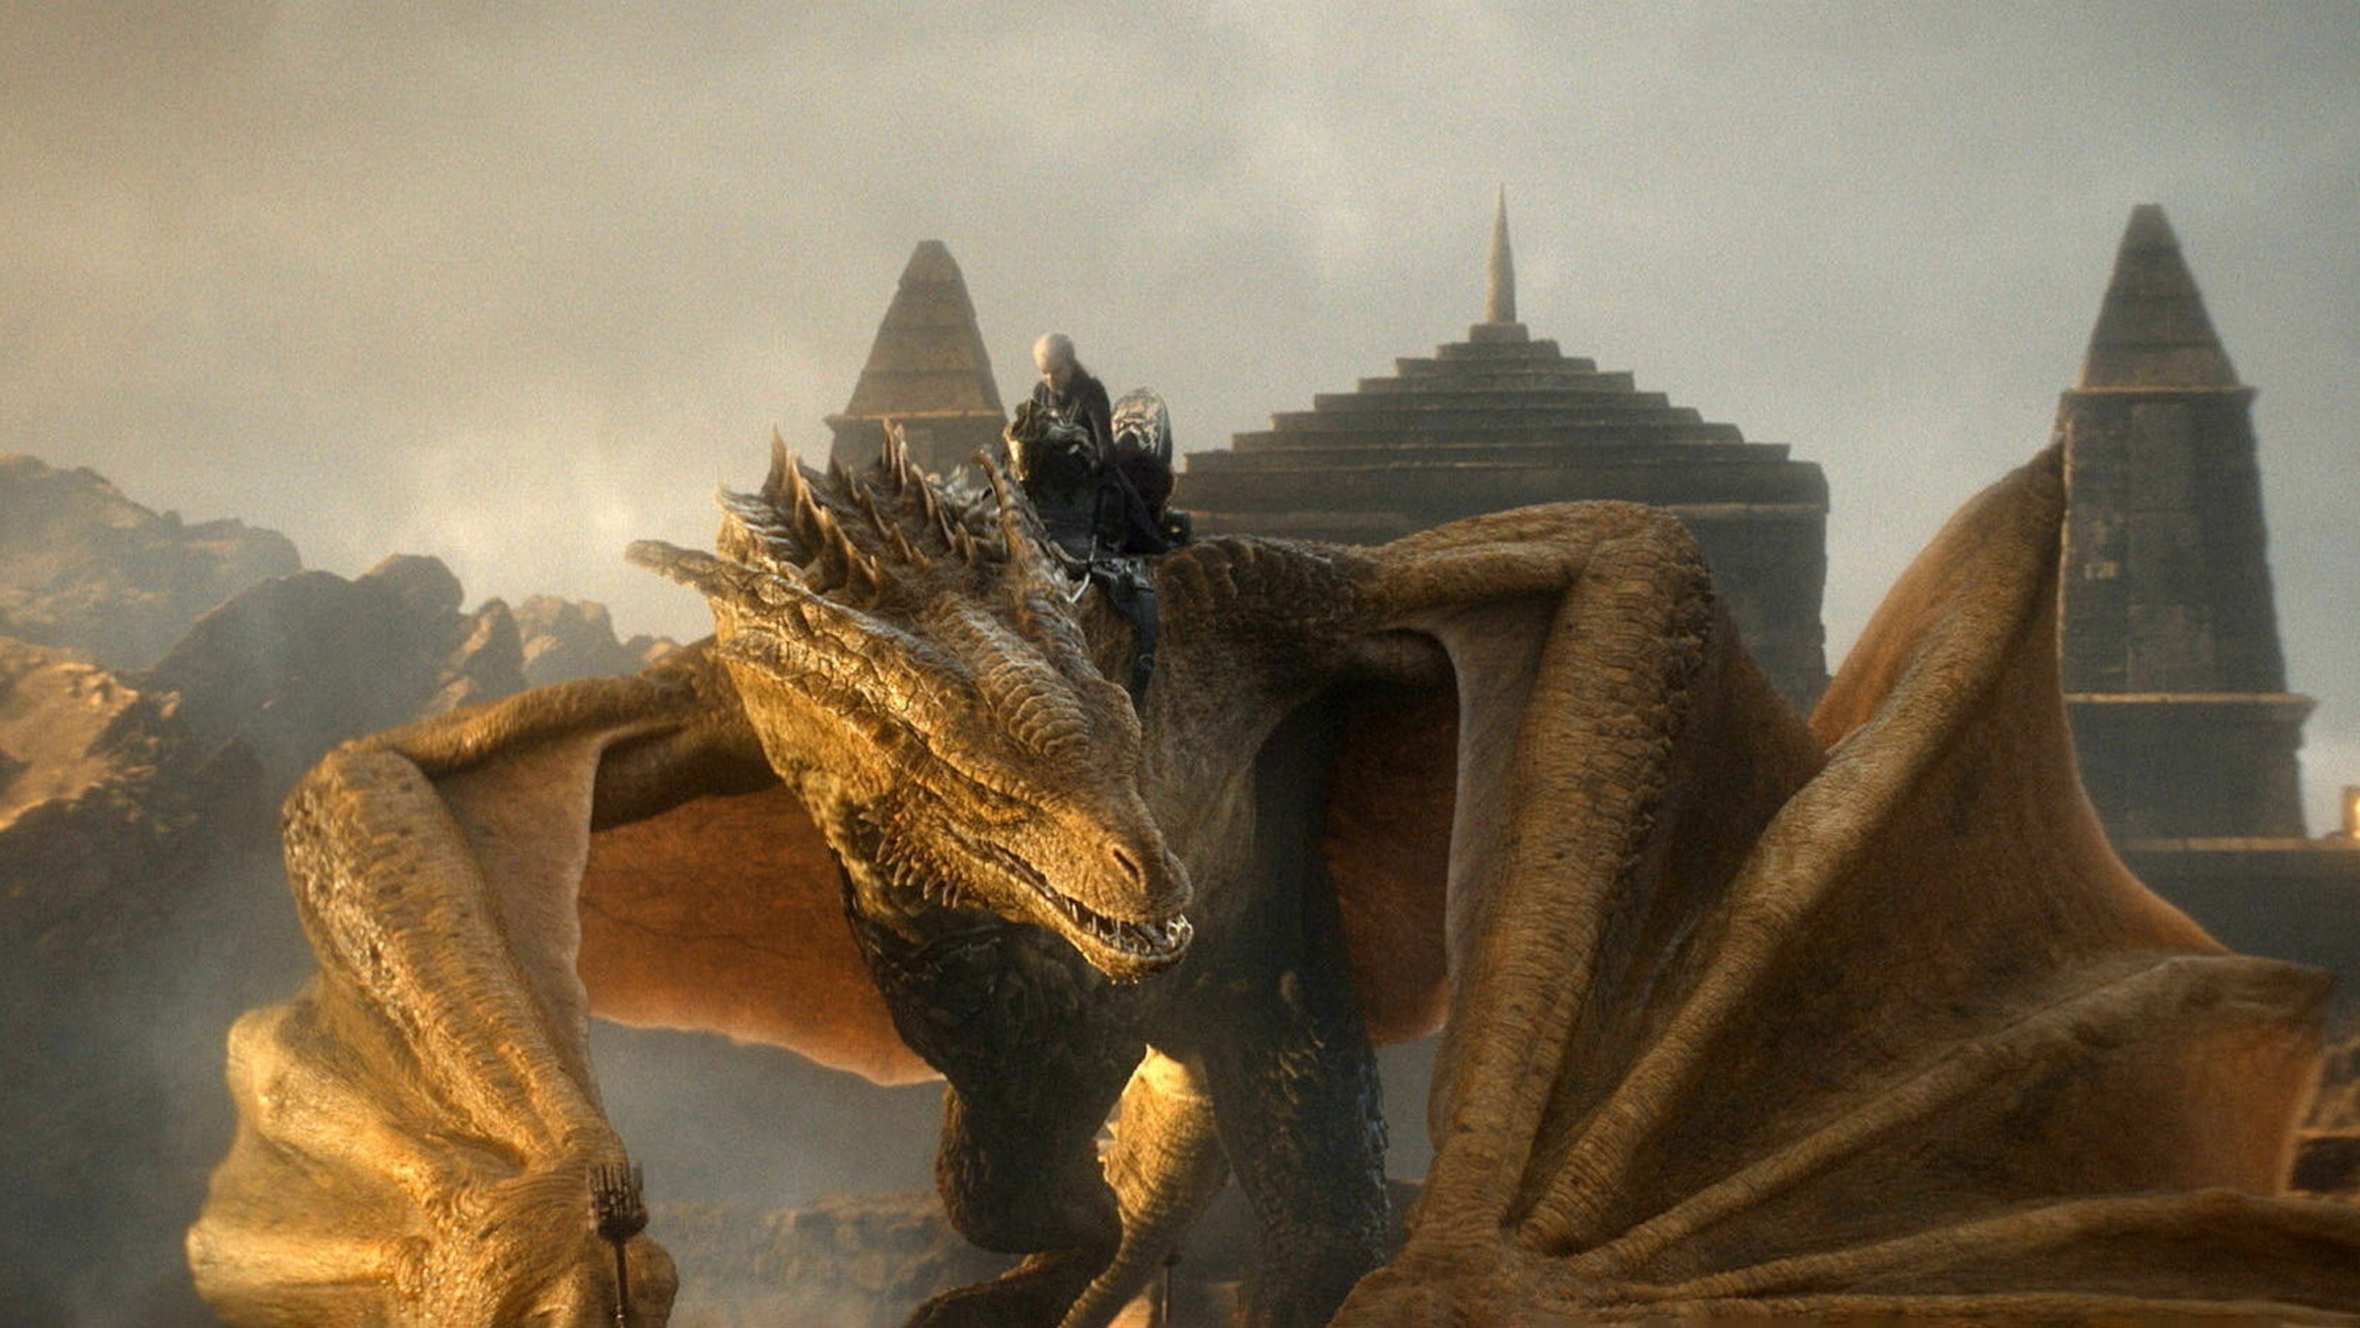 A person with white-blond hair rides on a huge dragon, with the roofs of temple-like buildings behind